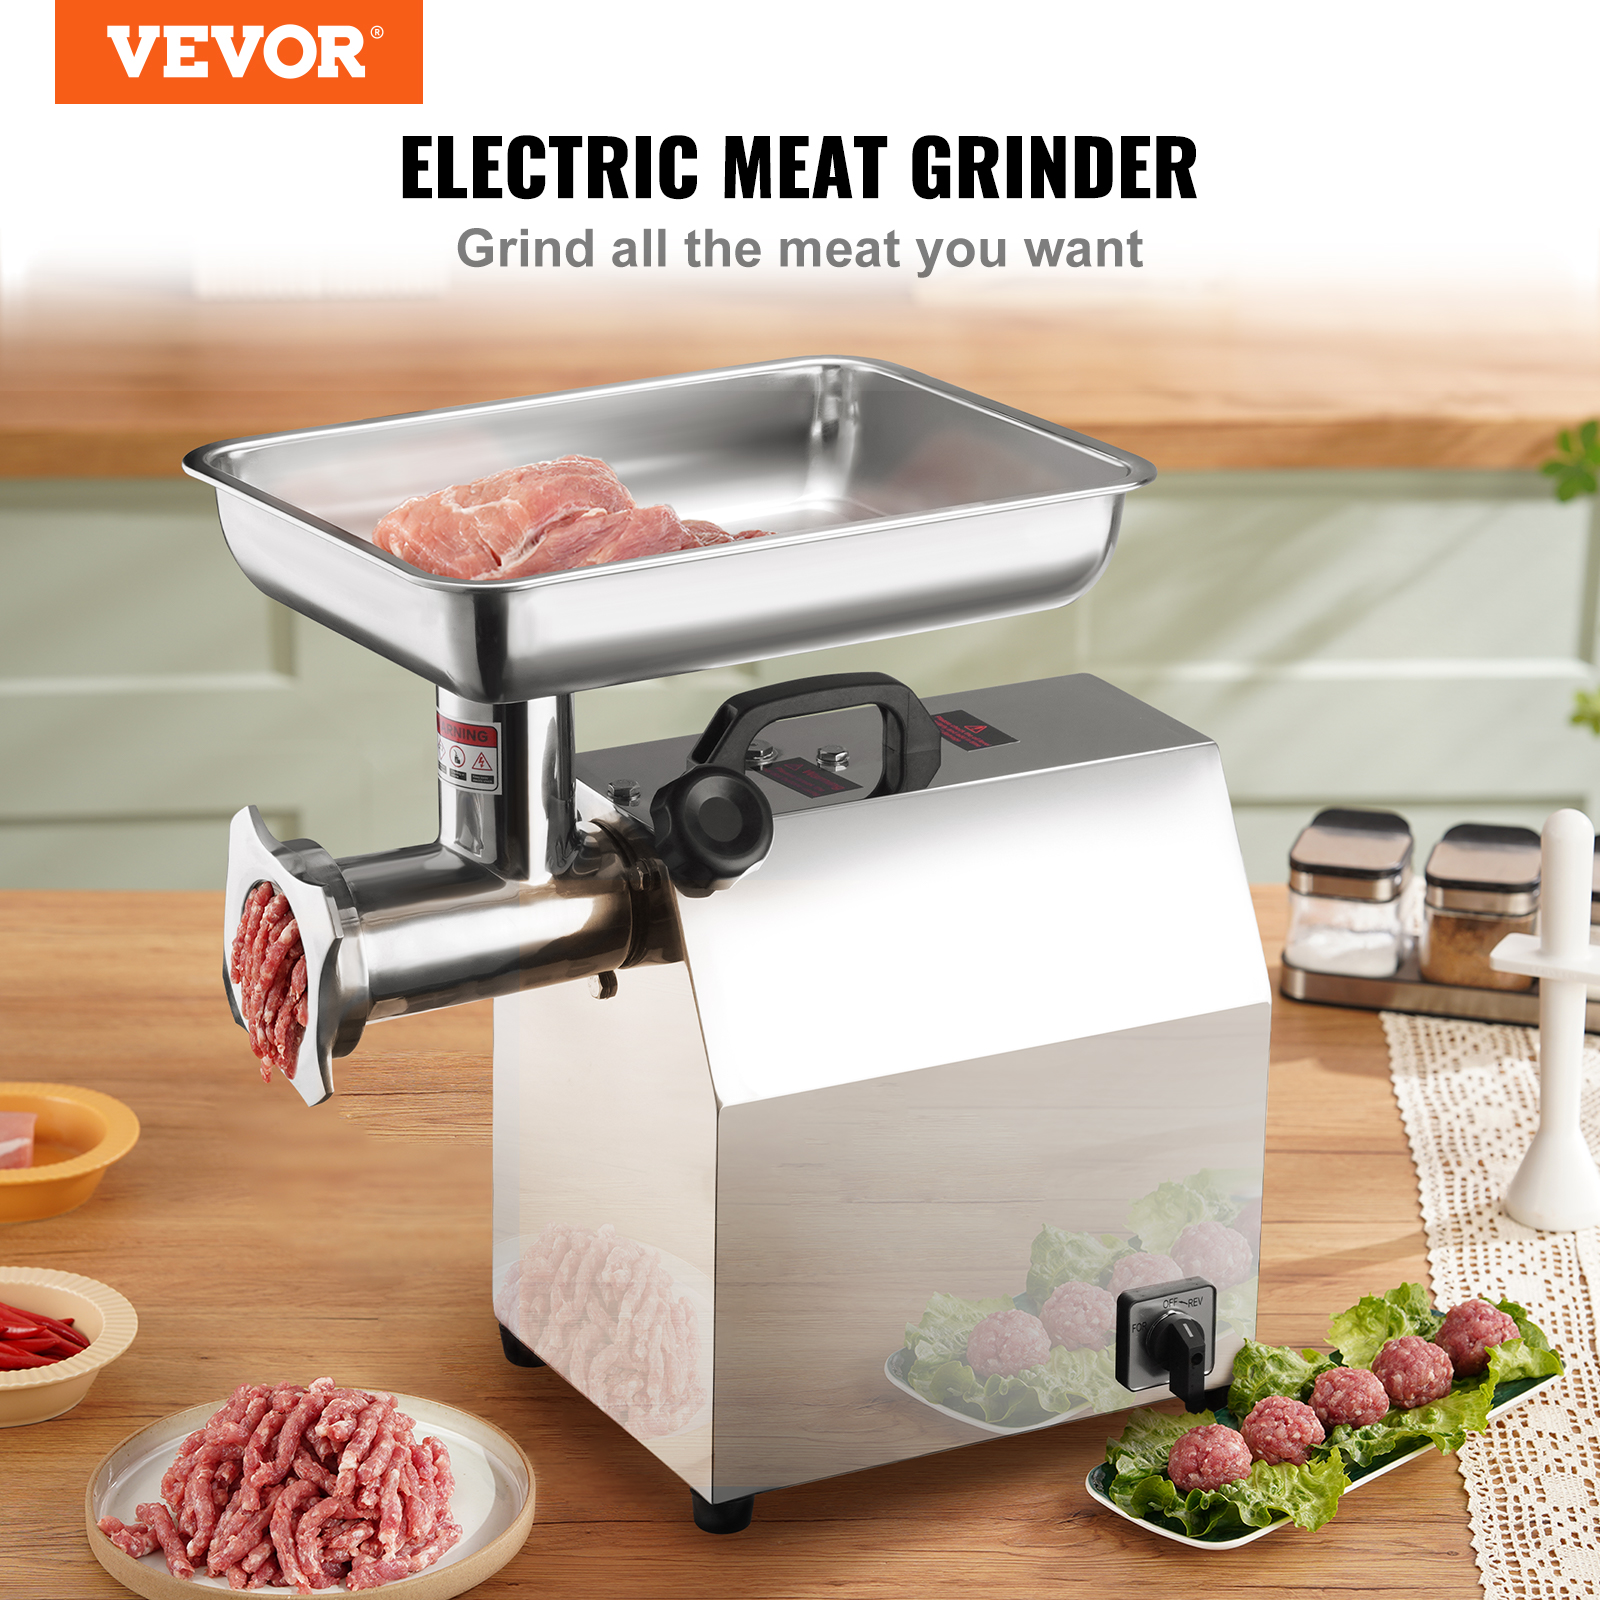 BENTISM Electric Meat Grinder 8.3 lbs/Min Capacity,650W Sausage Stuffer with 2 Blade,3 Grinding Plates,ETL Listed - image 2 of 9